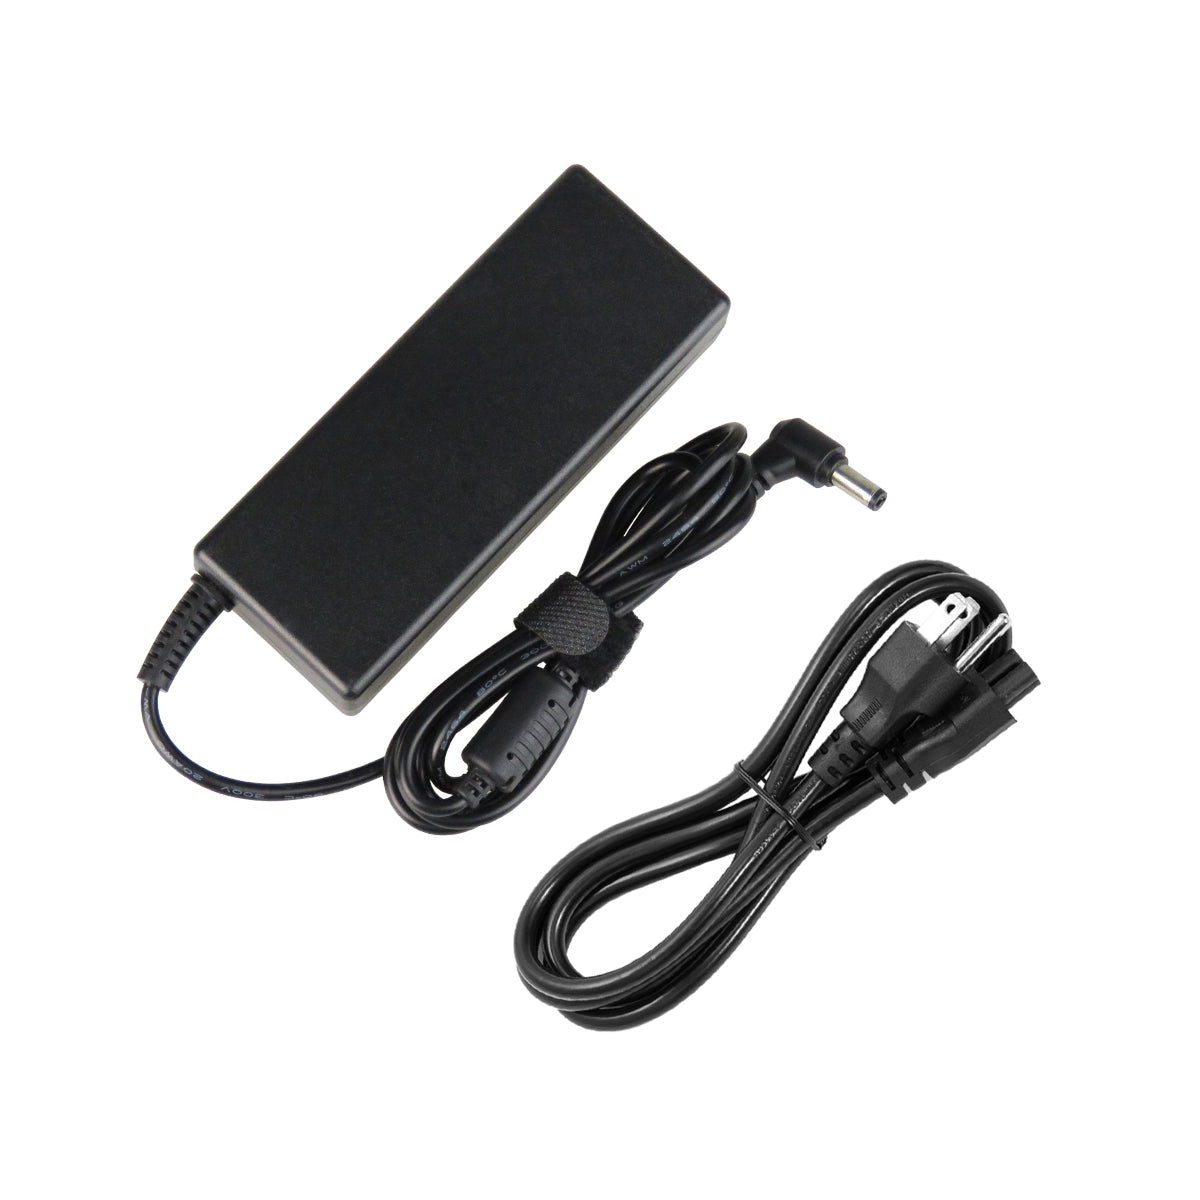 AC Adapter Charger for ASUS N53 Notebook.